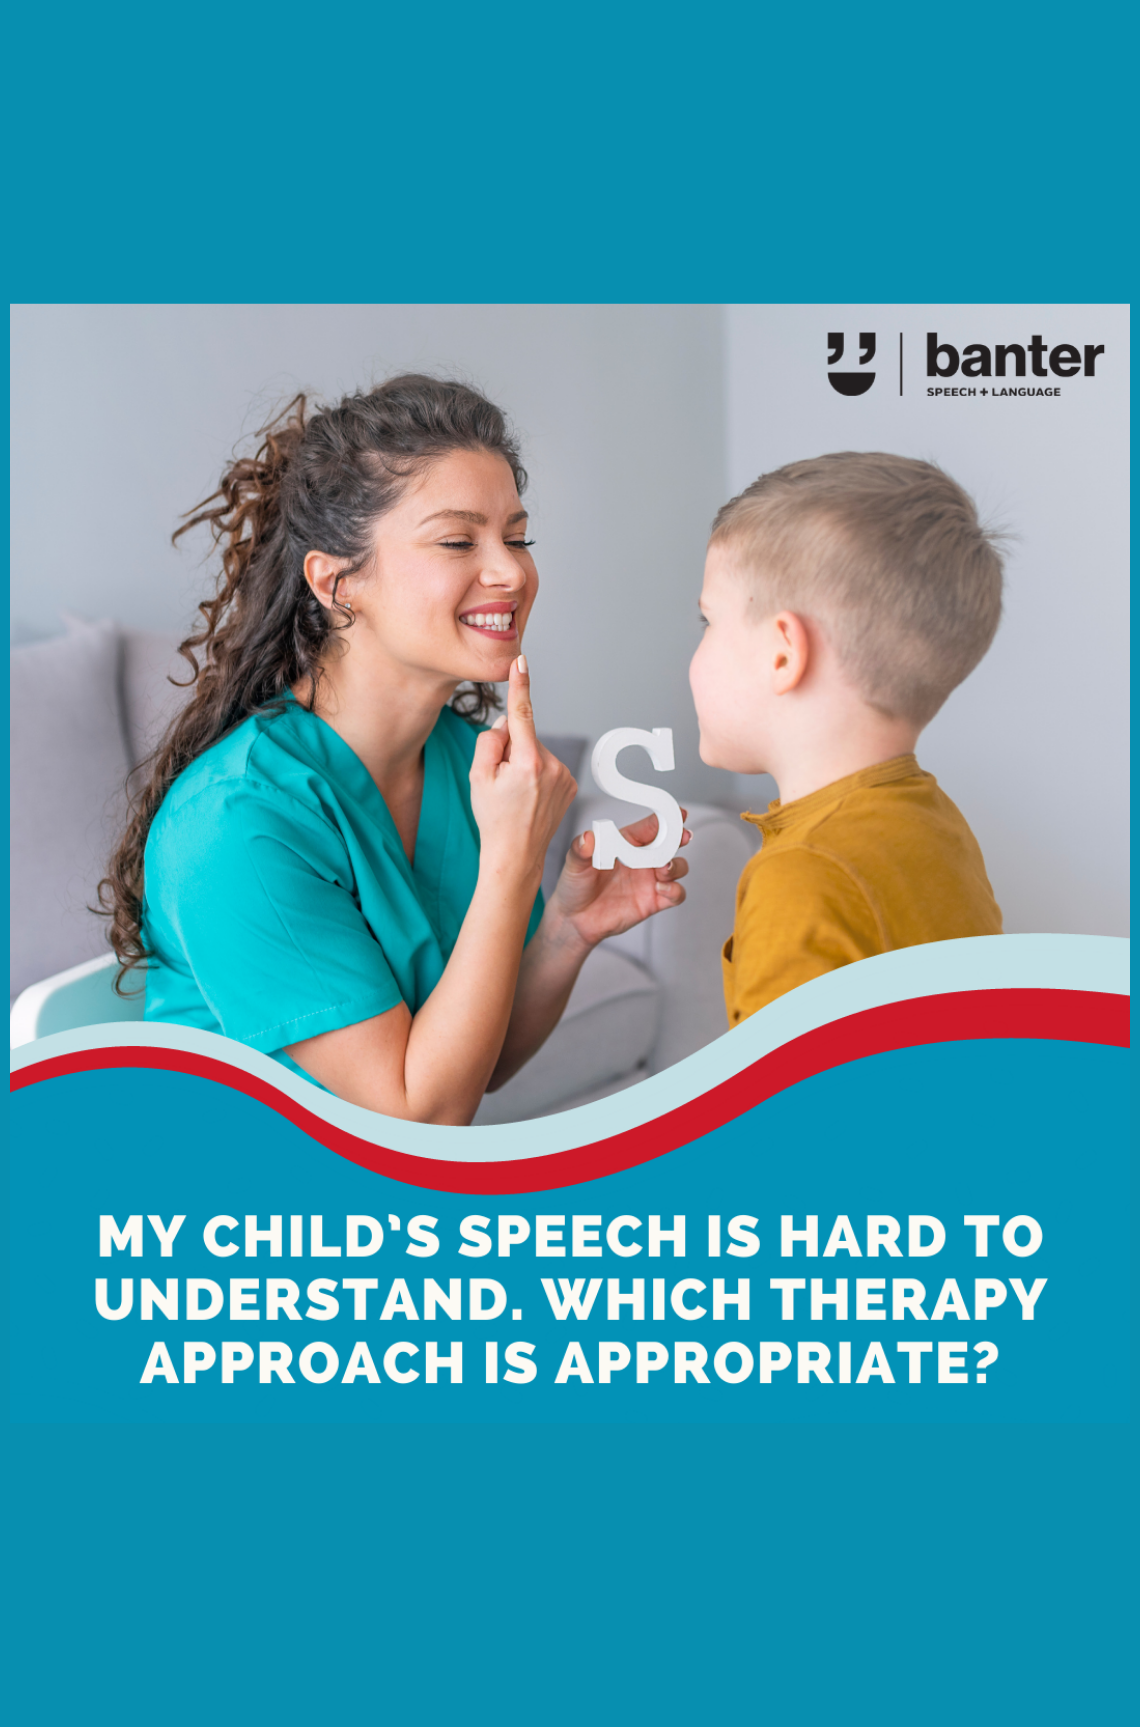 My child's speech is hard to understand. Which therapy approach is appropriate?